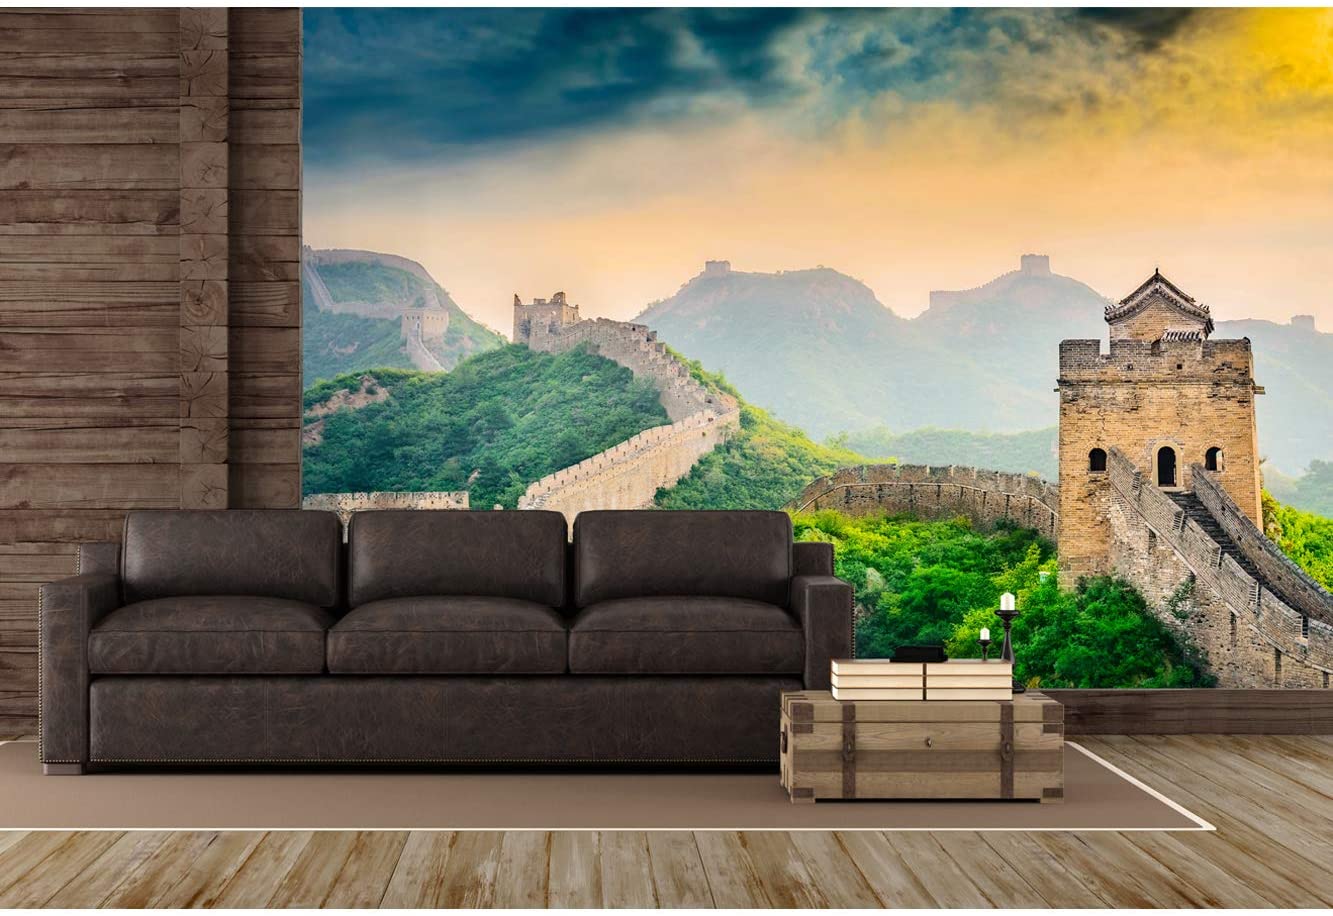 Vinyl Photo Mural And Wallpaper For Wall Chinese